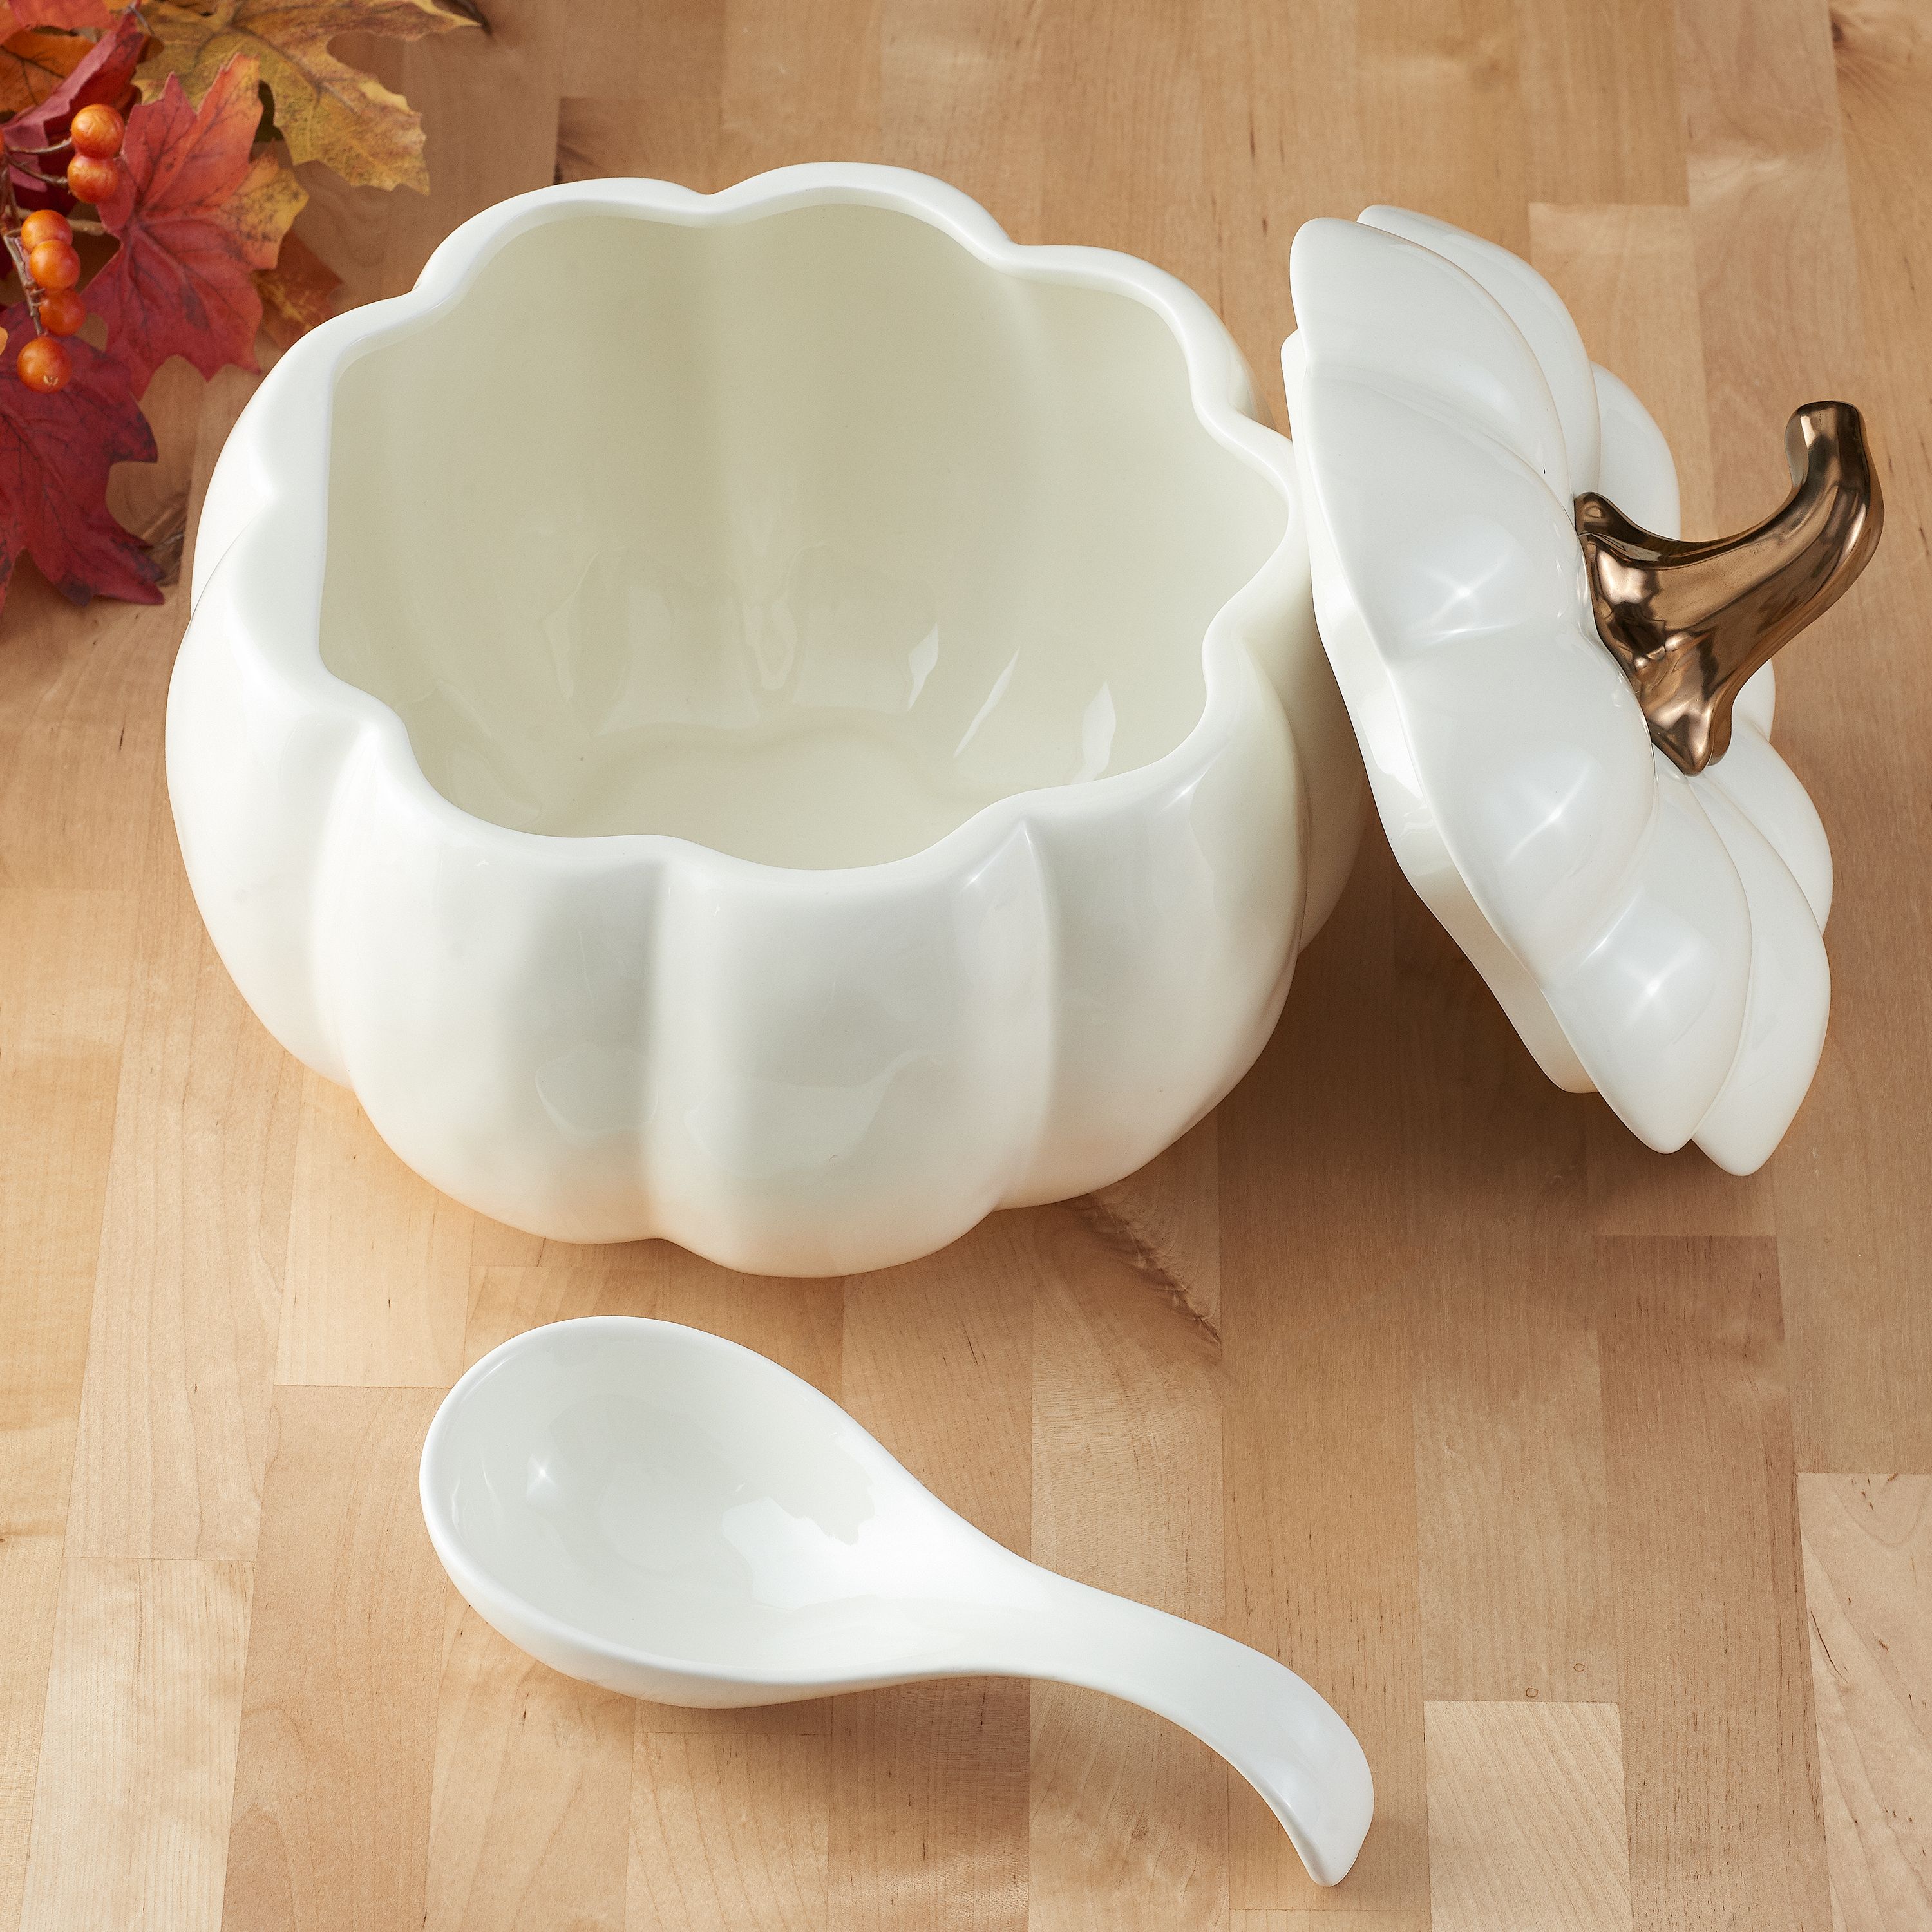 Better Homes & Gardens Pumpkin Soup Tureen Serving Bowl with Ladle - image 2 of 6